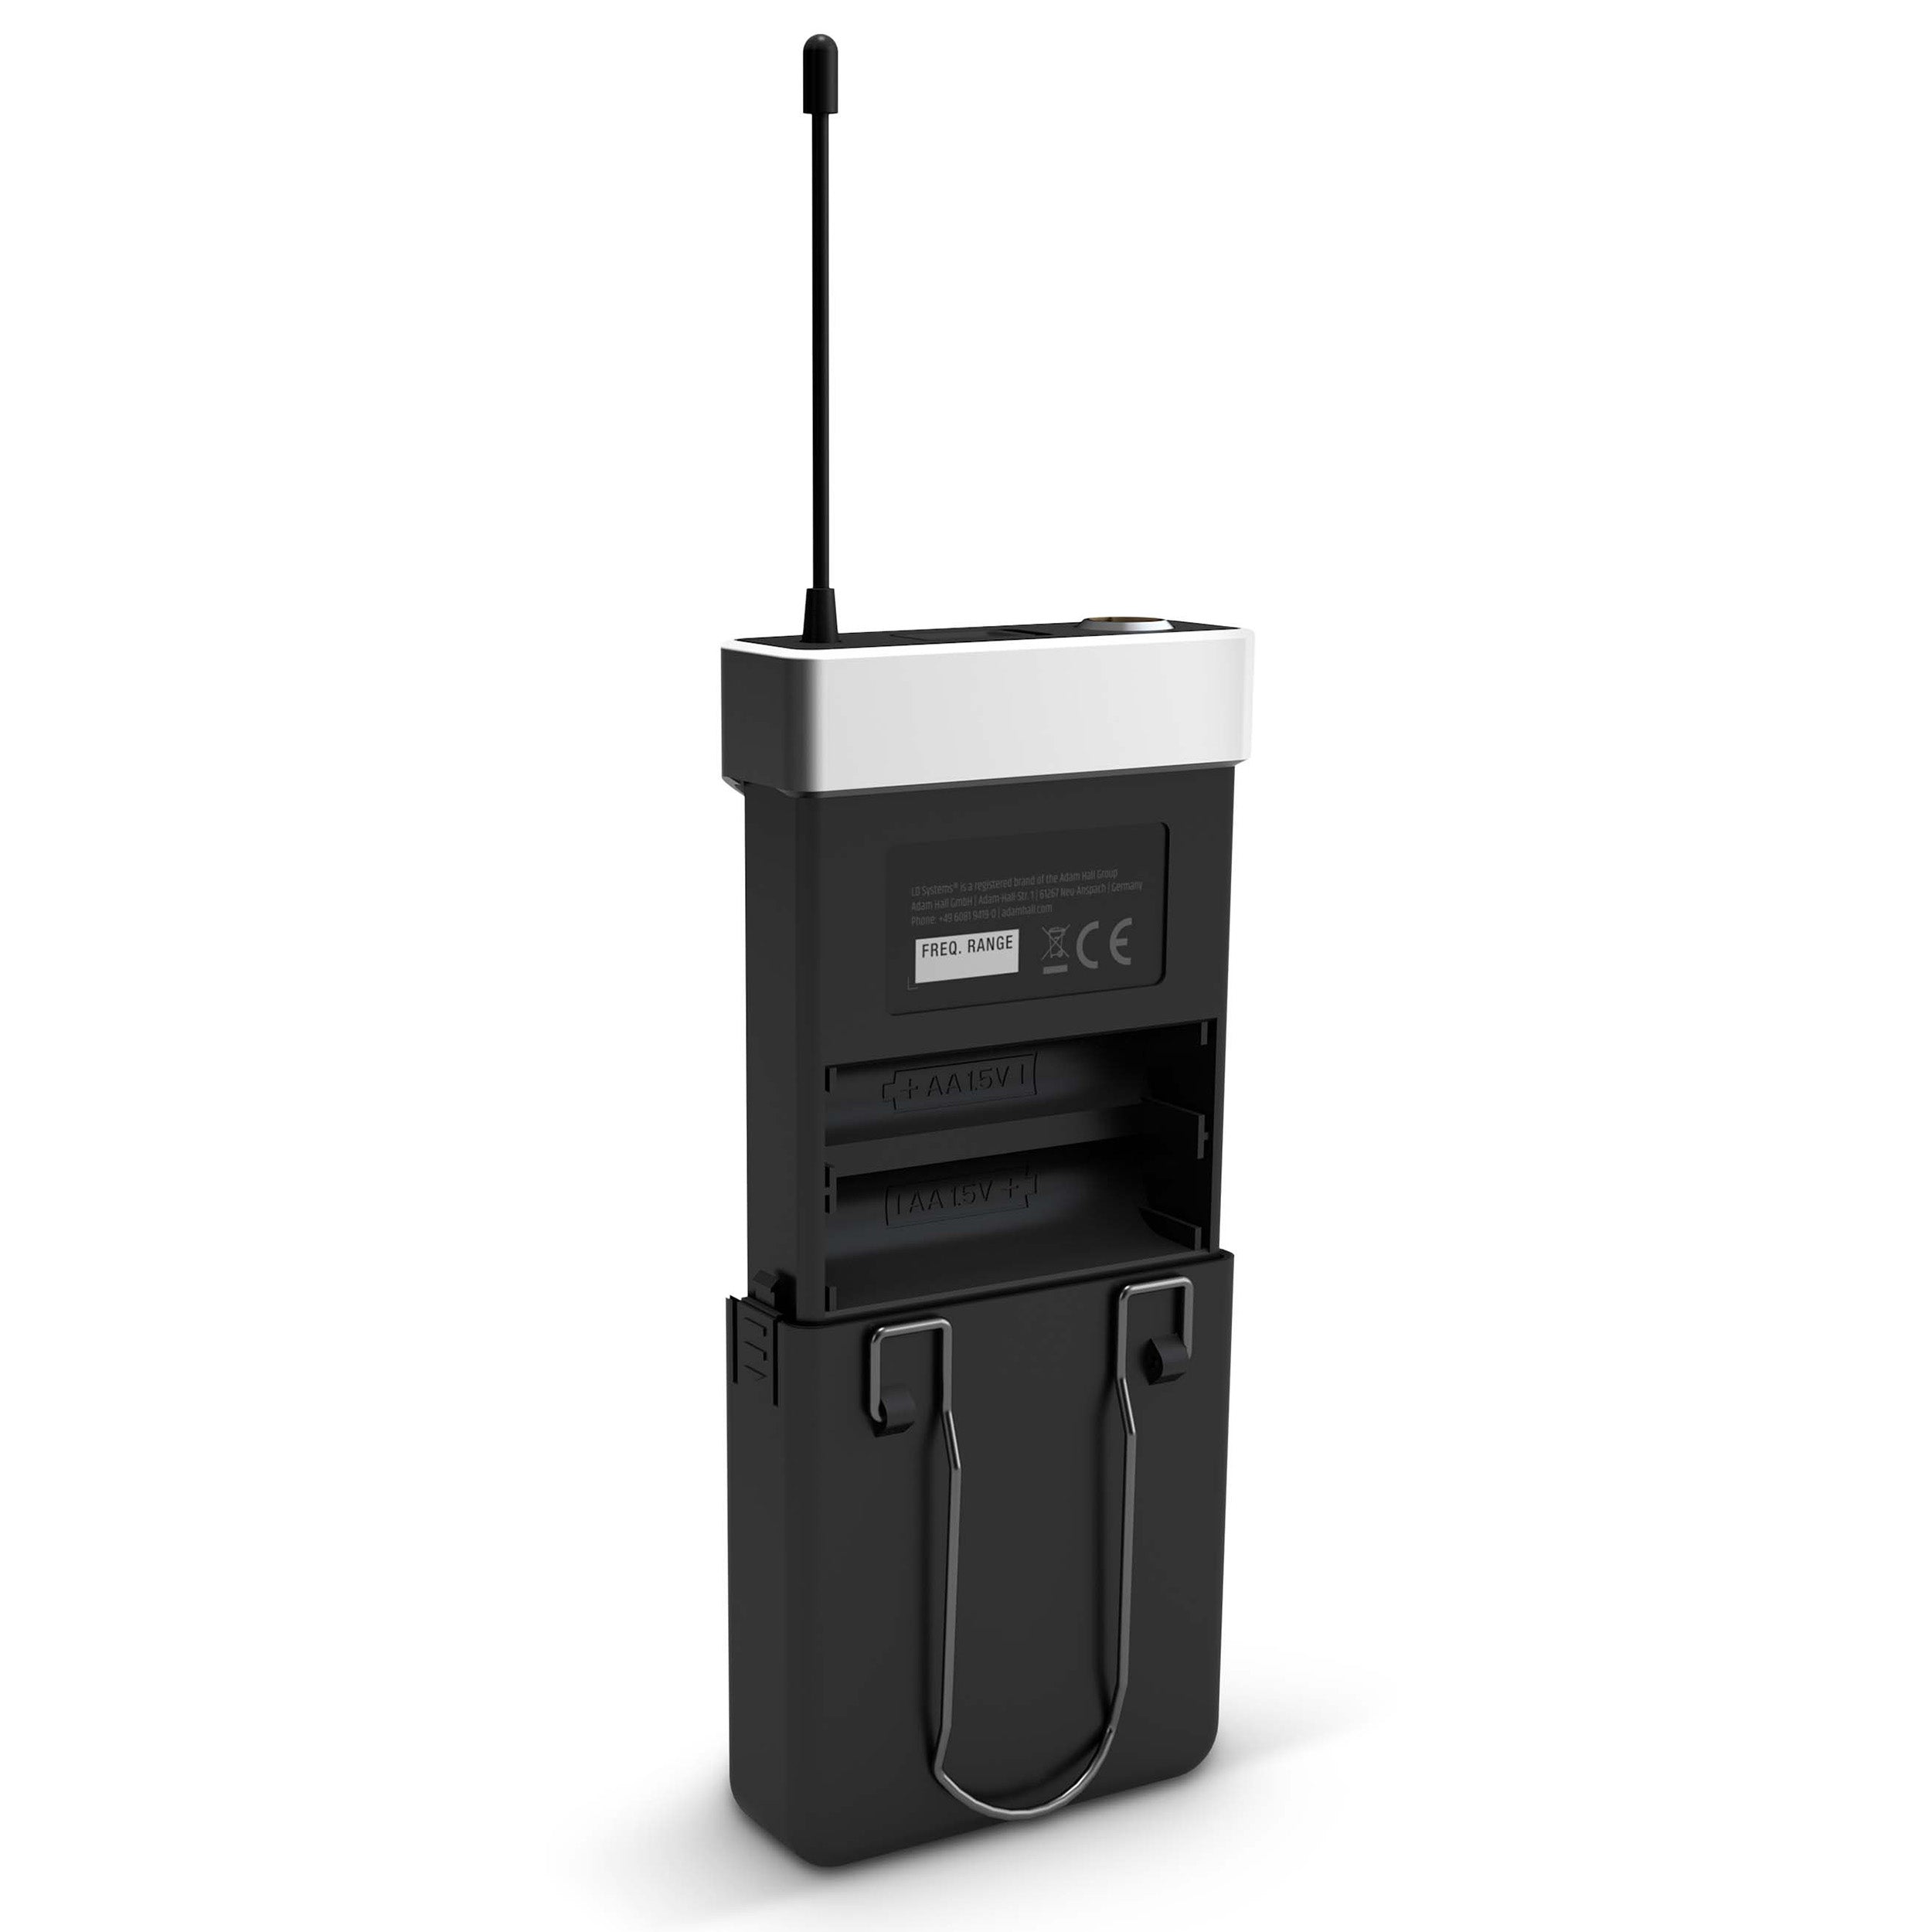 LD Systems U505.1 BPH US, Wireless Microphone System with Bodypack and Headset - 512 - 542 MHz by LD Systems